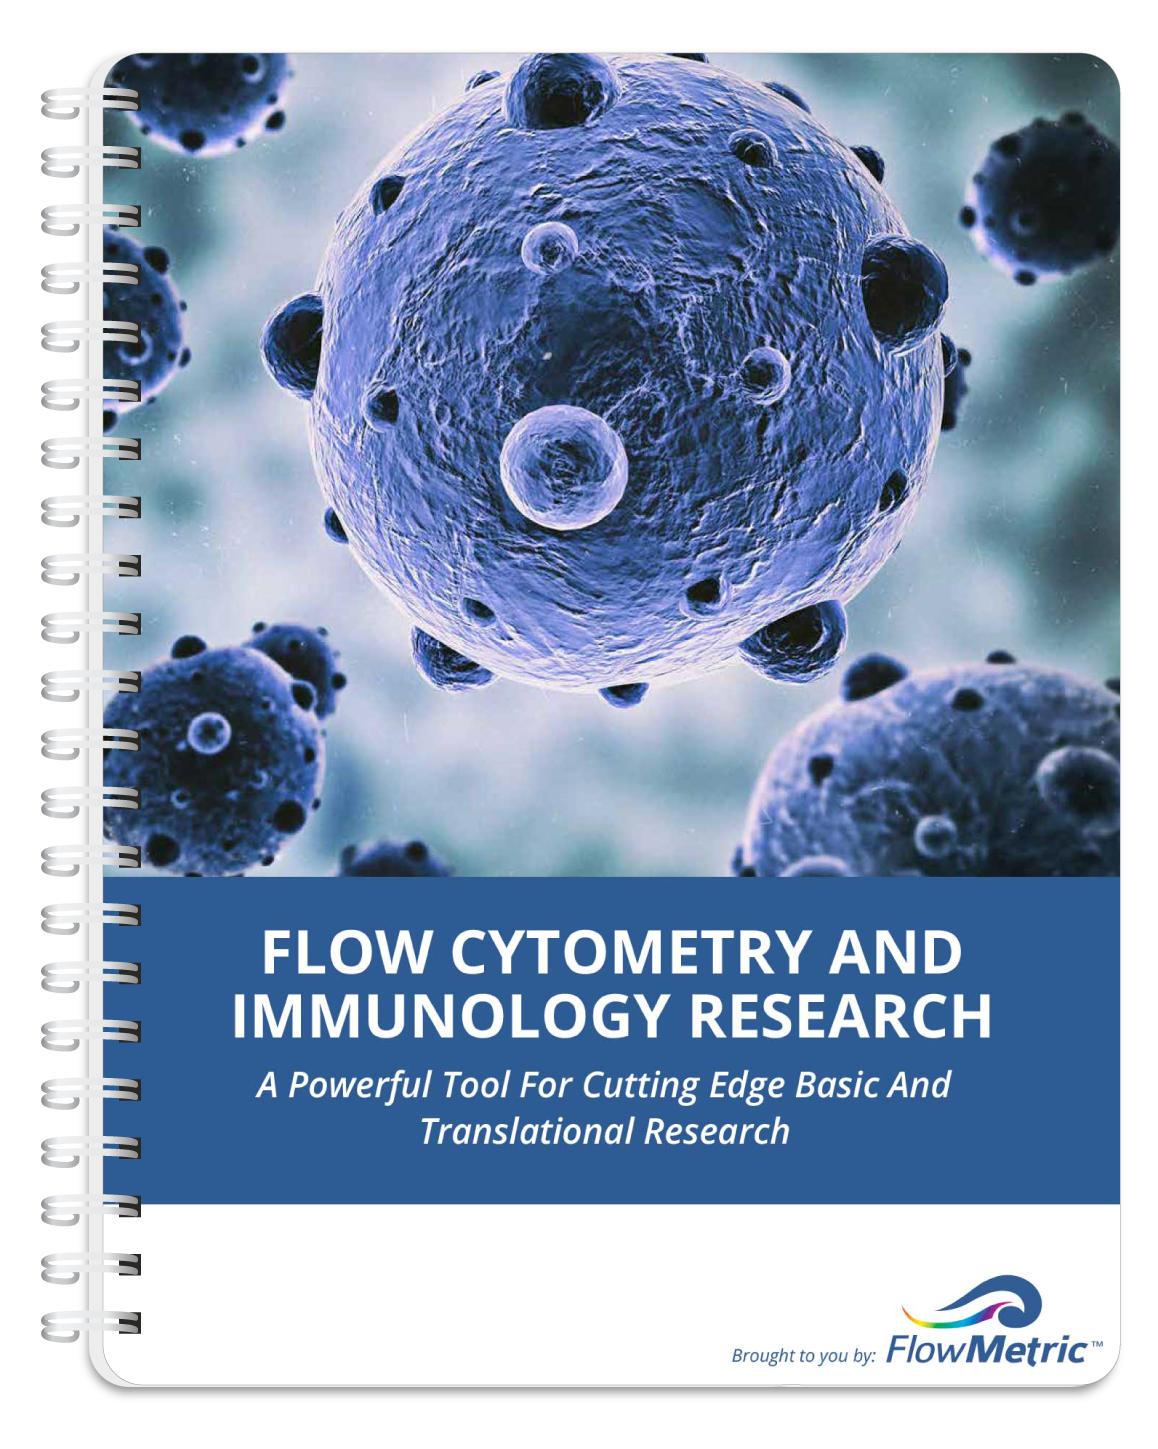 immunology latest research paper